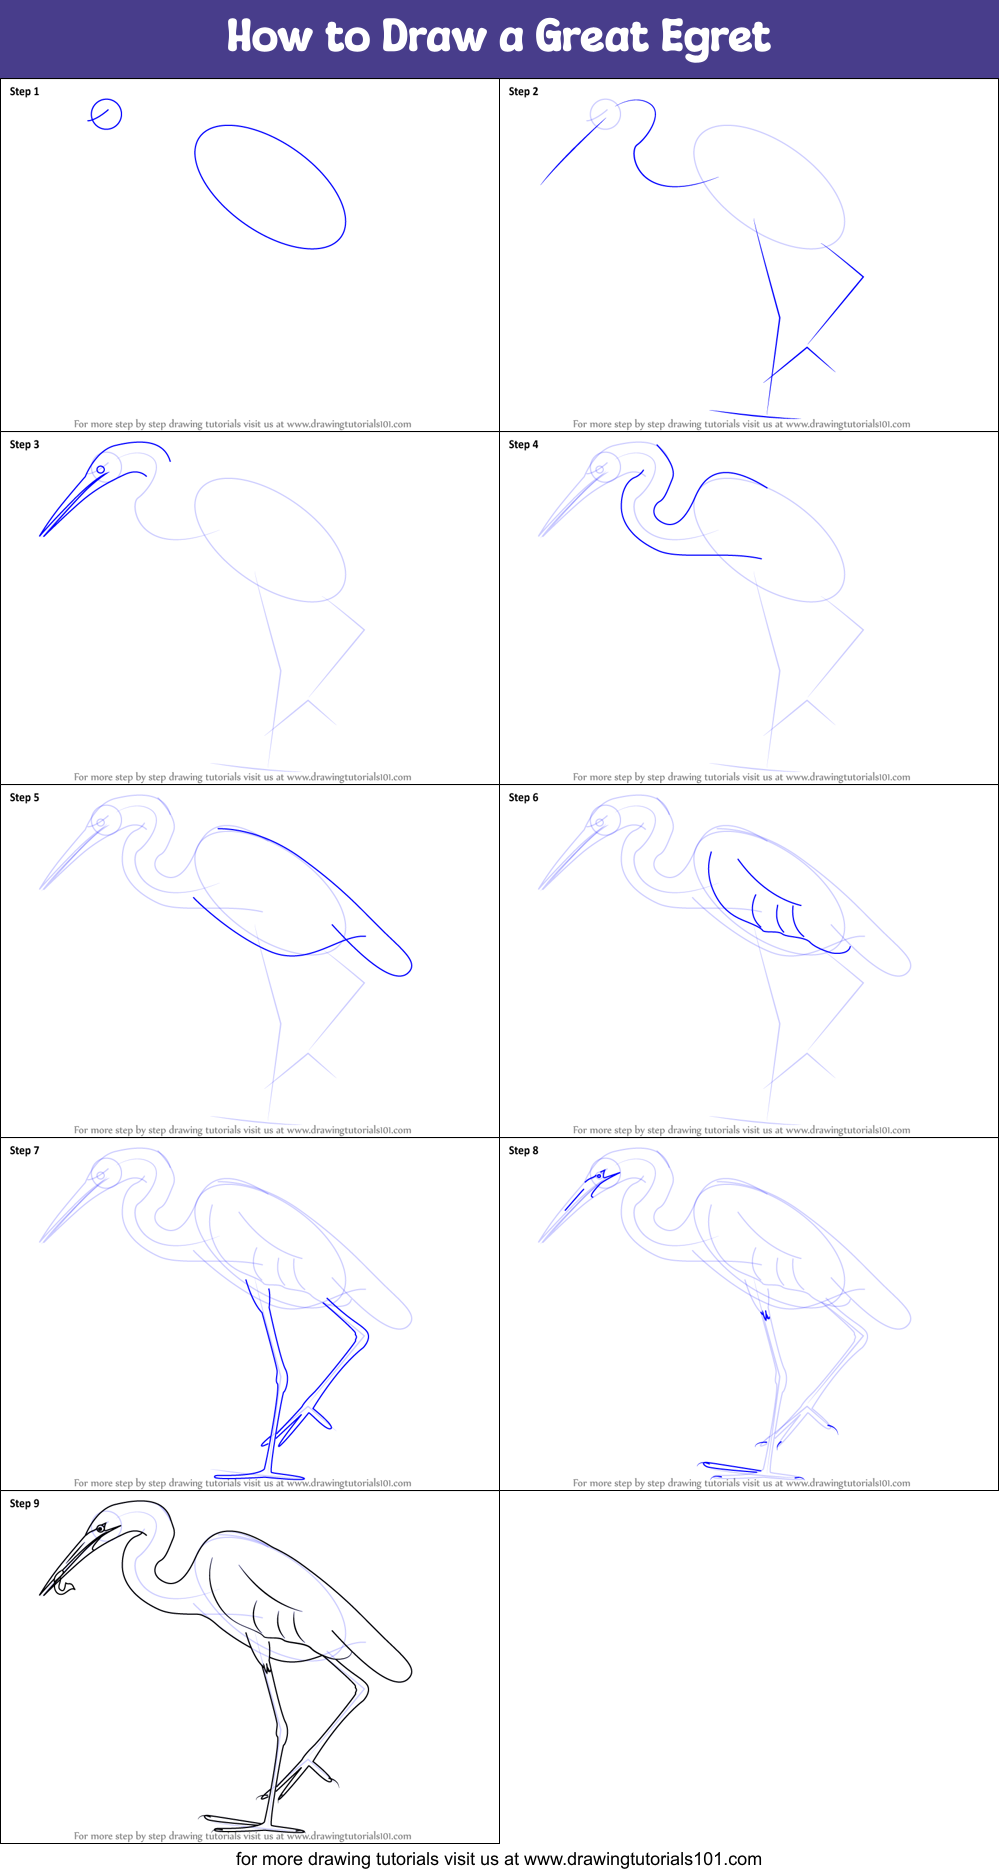 How to Draw a Great Egret printable step by step drawing sheet